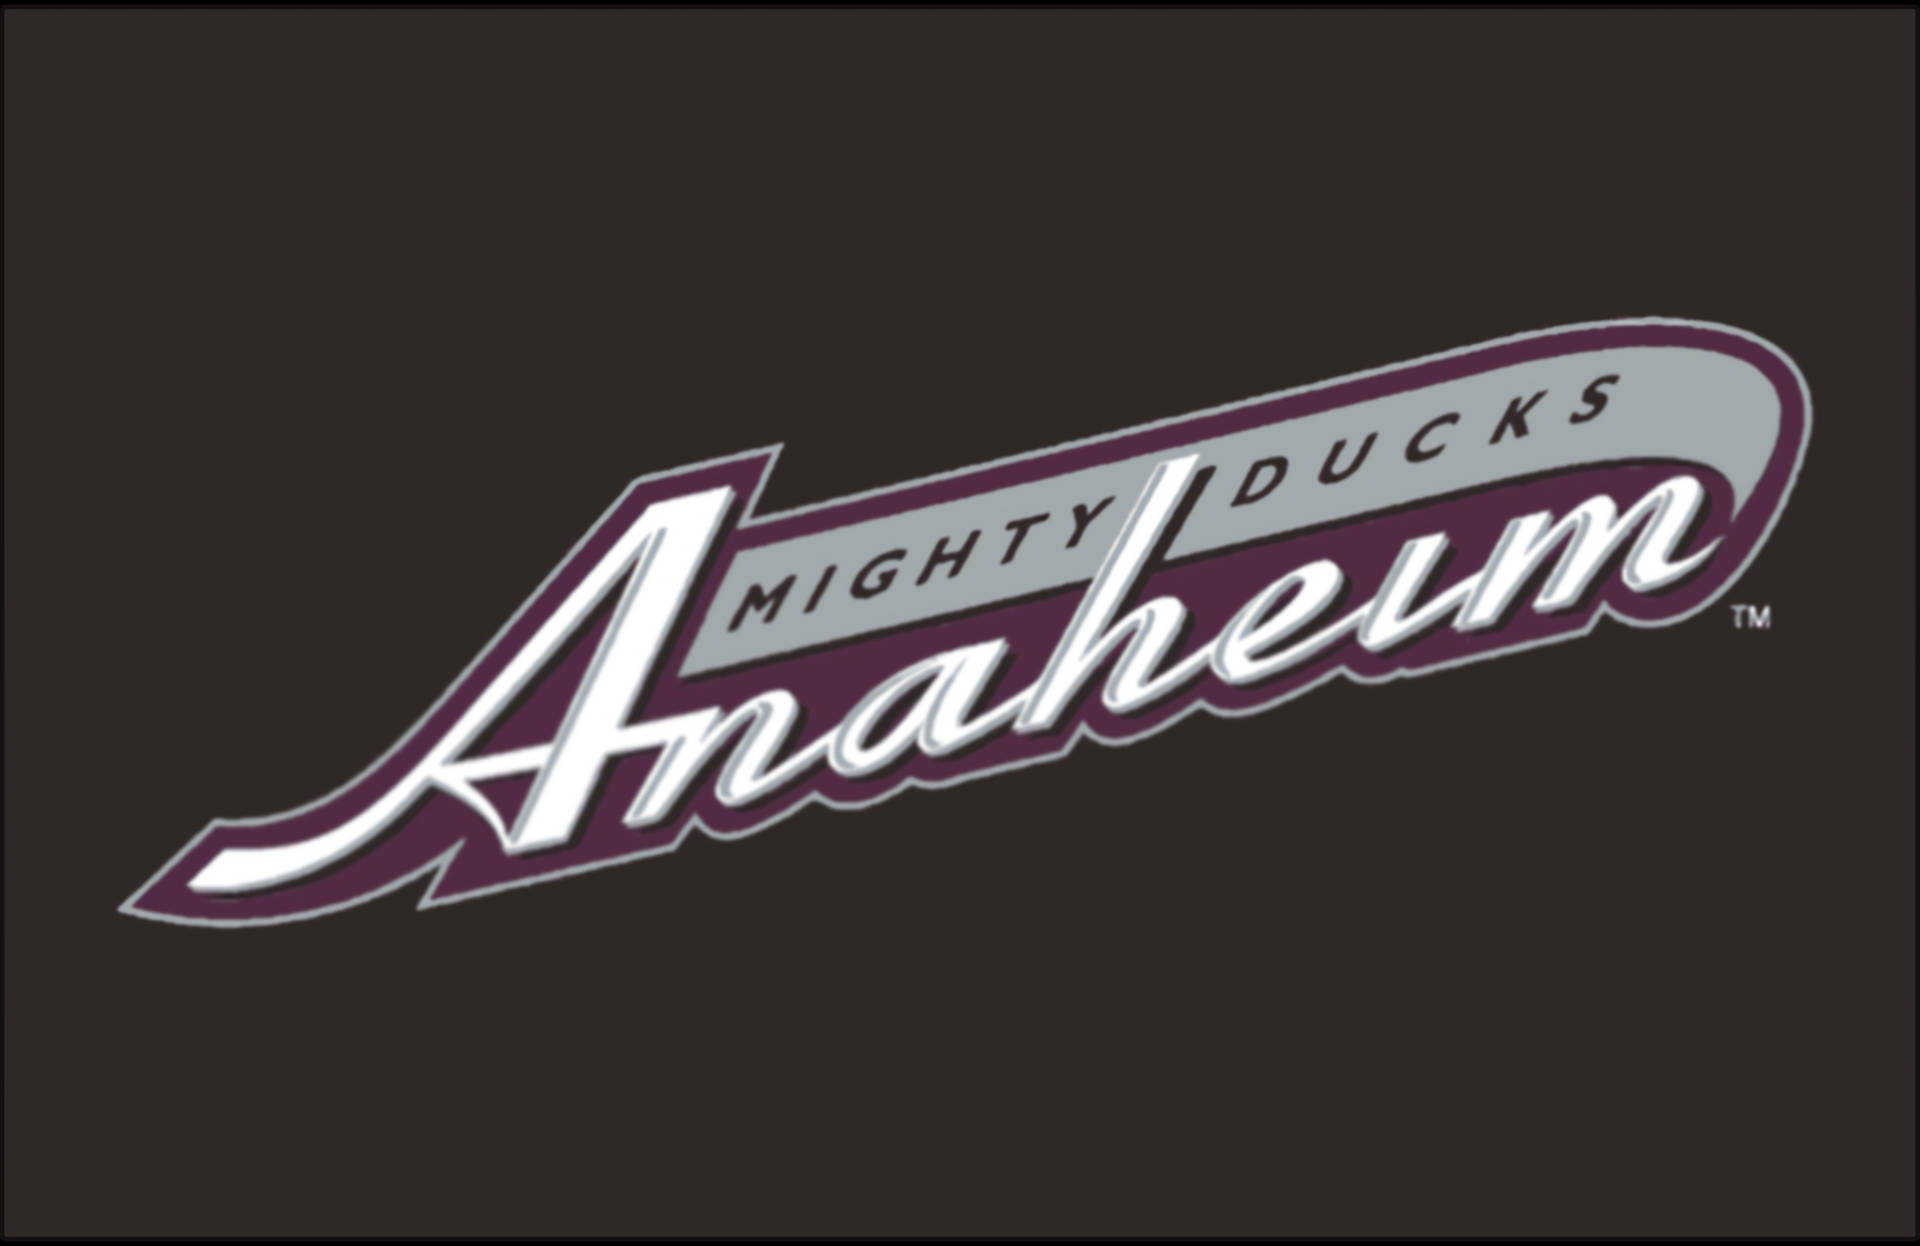 Classic Jersey Logo Design Of The Anaheim Ducks From 2003